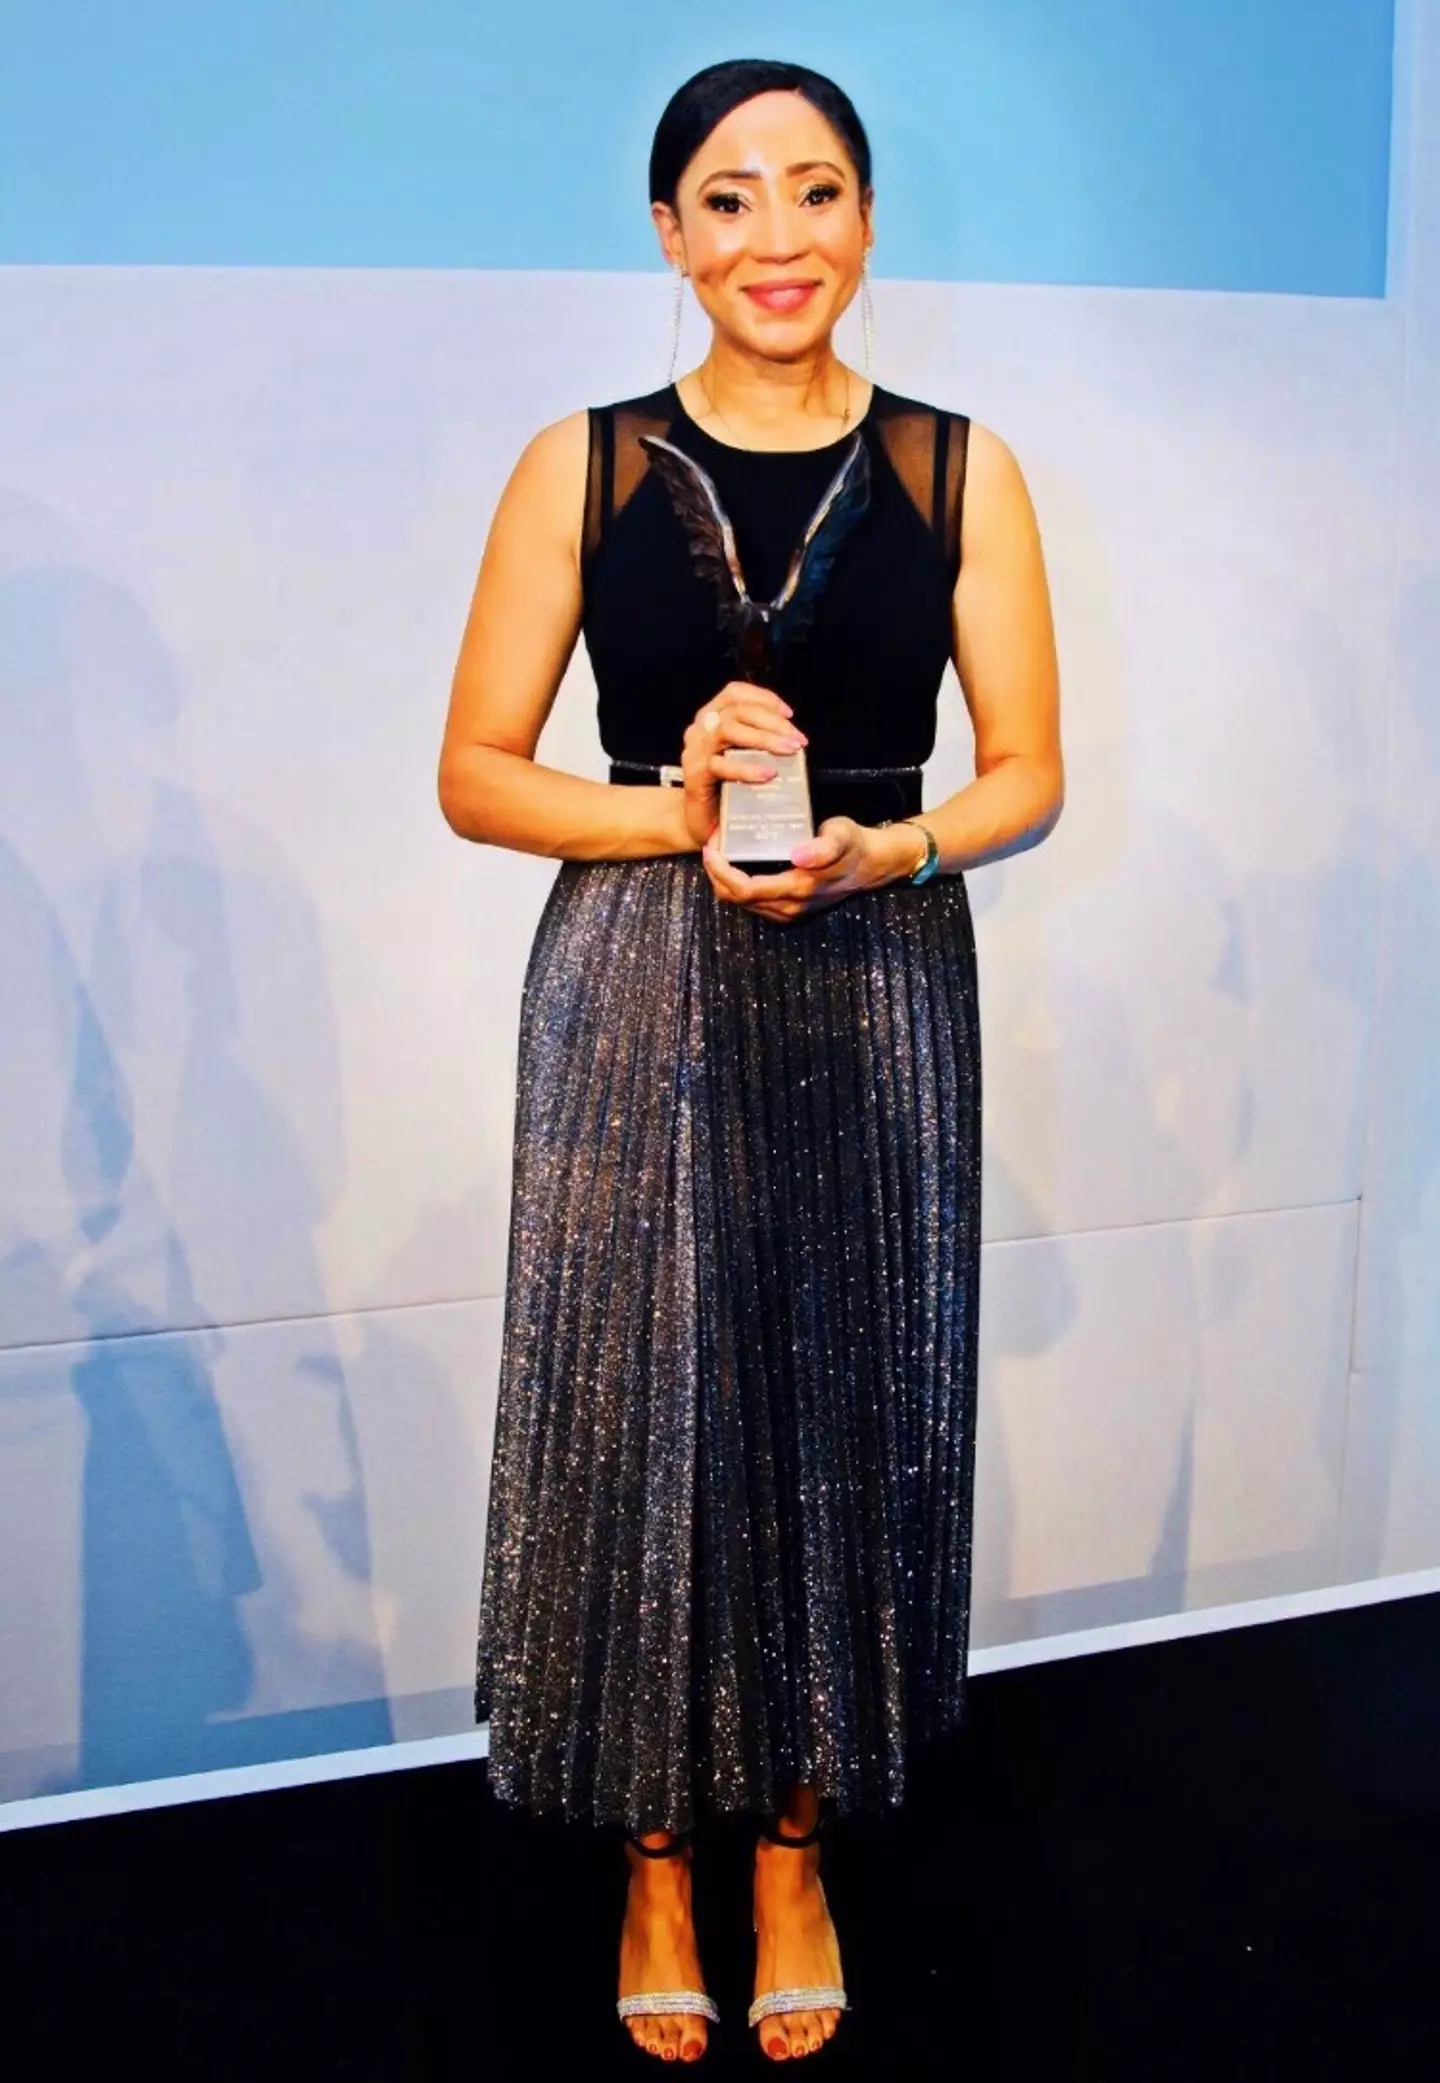 Natasha was given Lorraine Kelly's Inspirational Woman of the Year Award in 2019 (